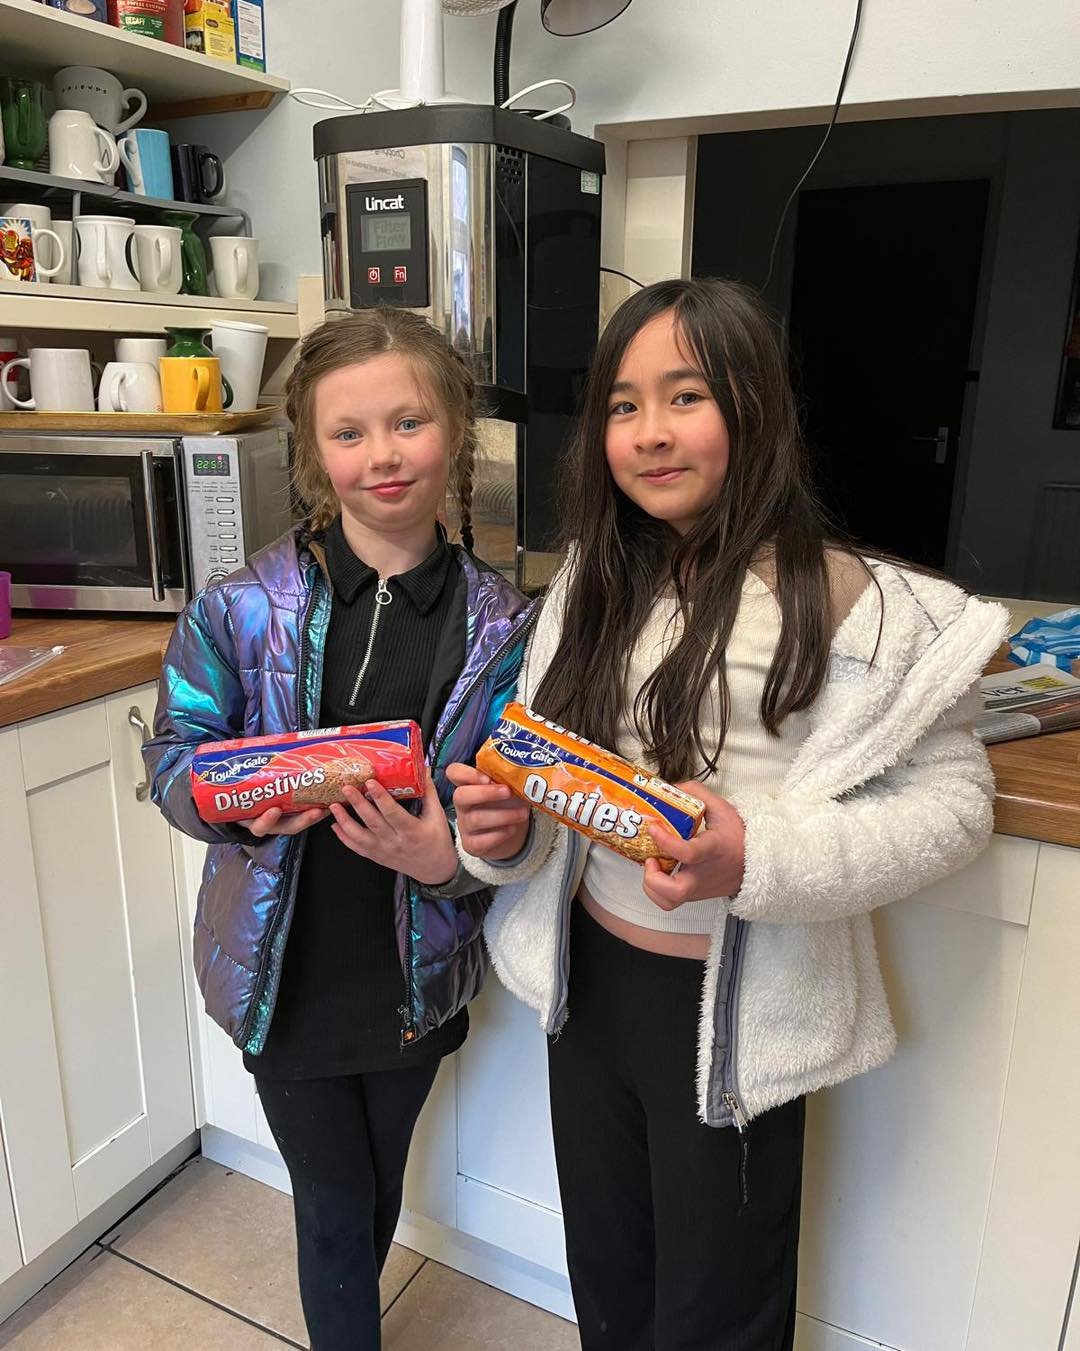 Big shout out to Jessica and Eliza who sold lemonade and ice lollies to raised money for us! They came down to drop off the fantastic &pound;16 they raised as well as some bonus biscuits, and to see around our shelter 💛

Thank you so much for all yo